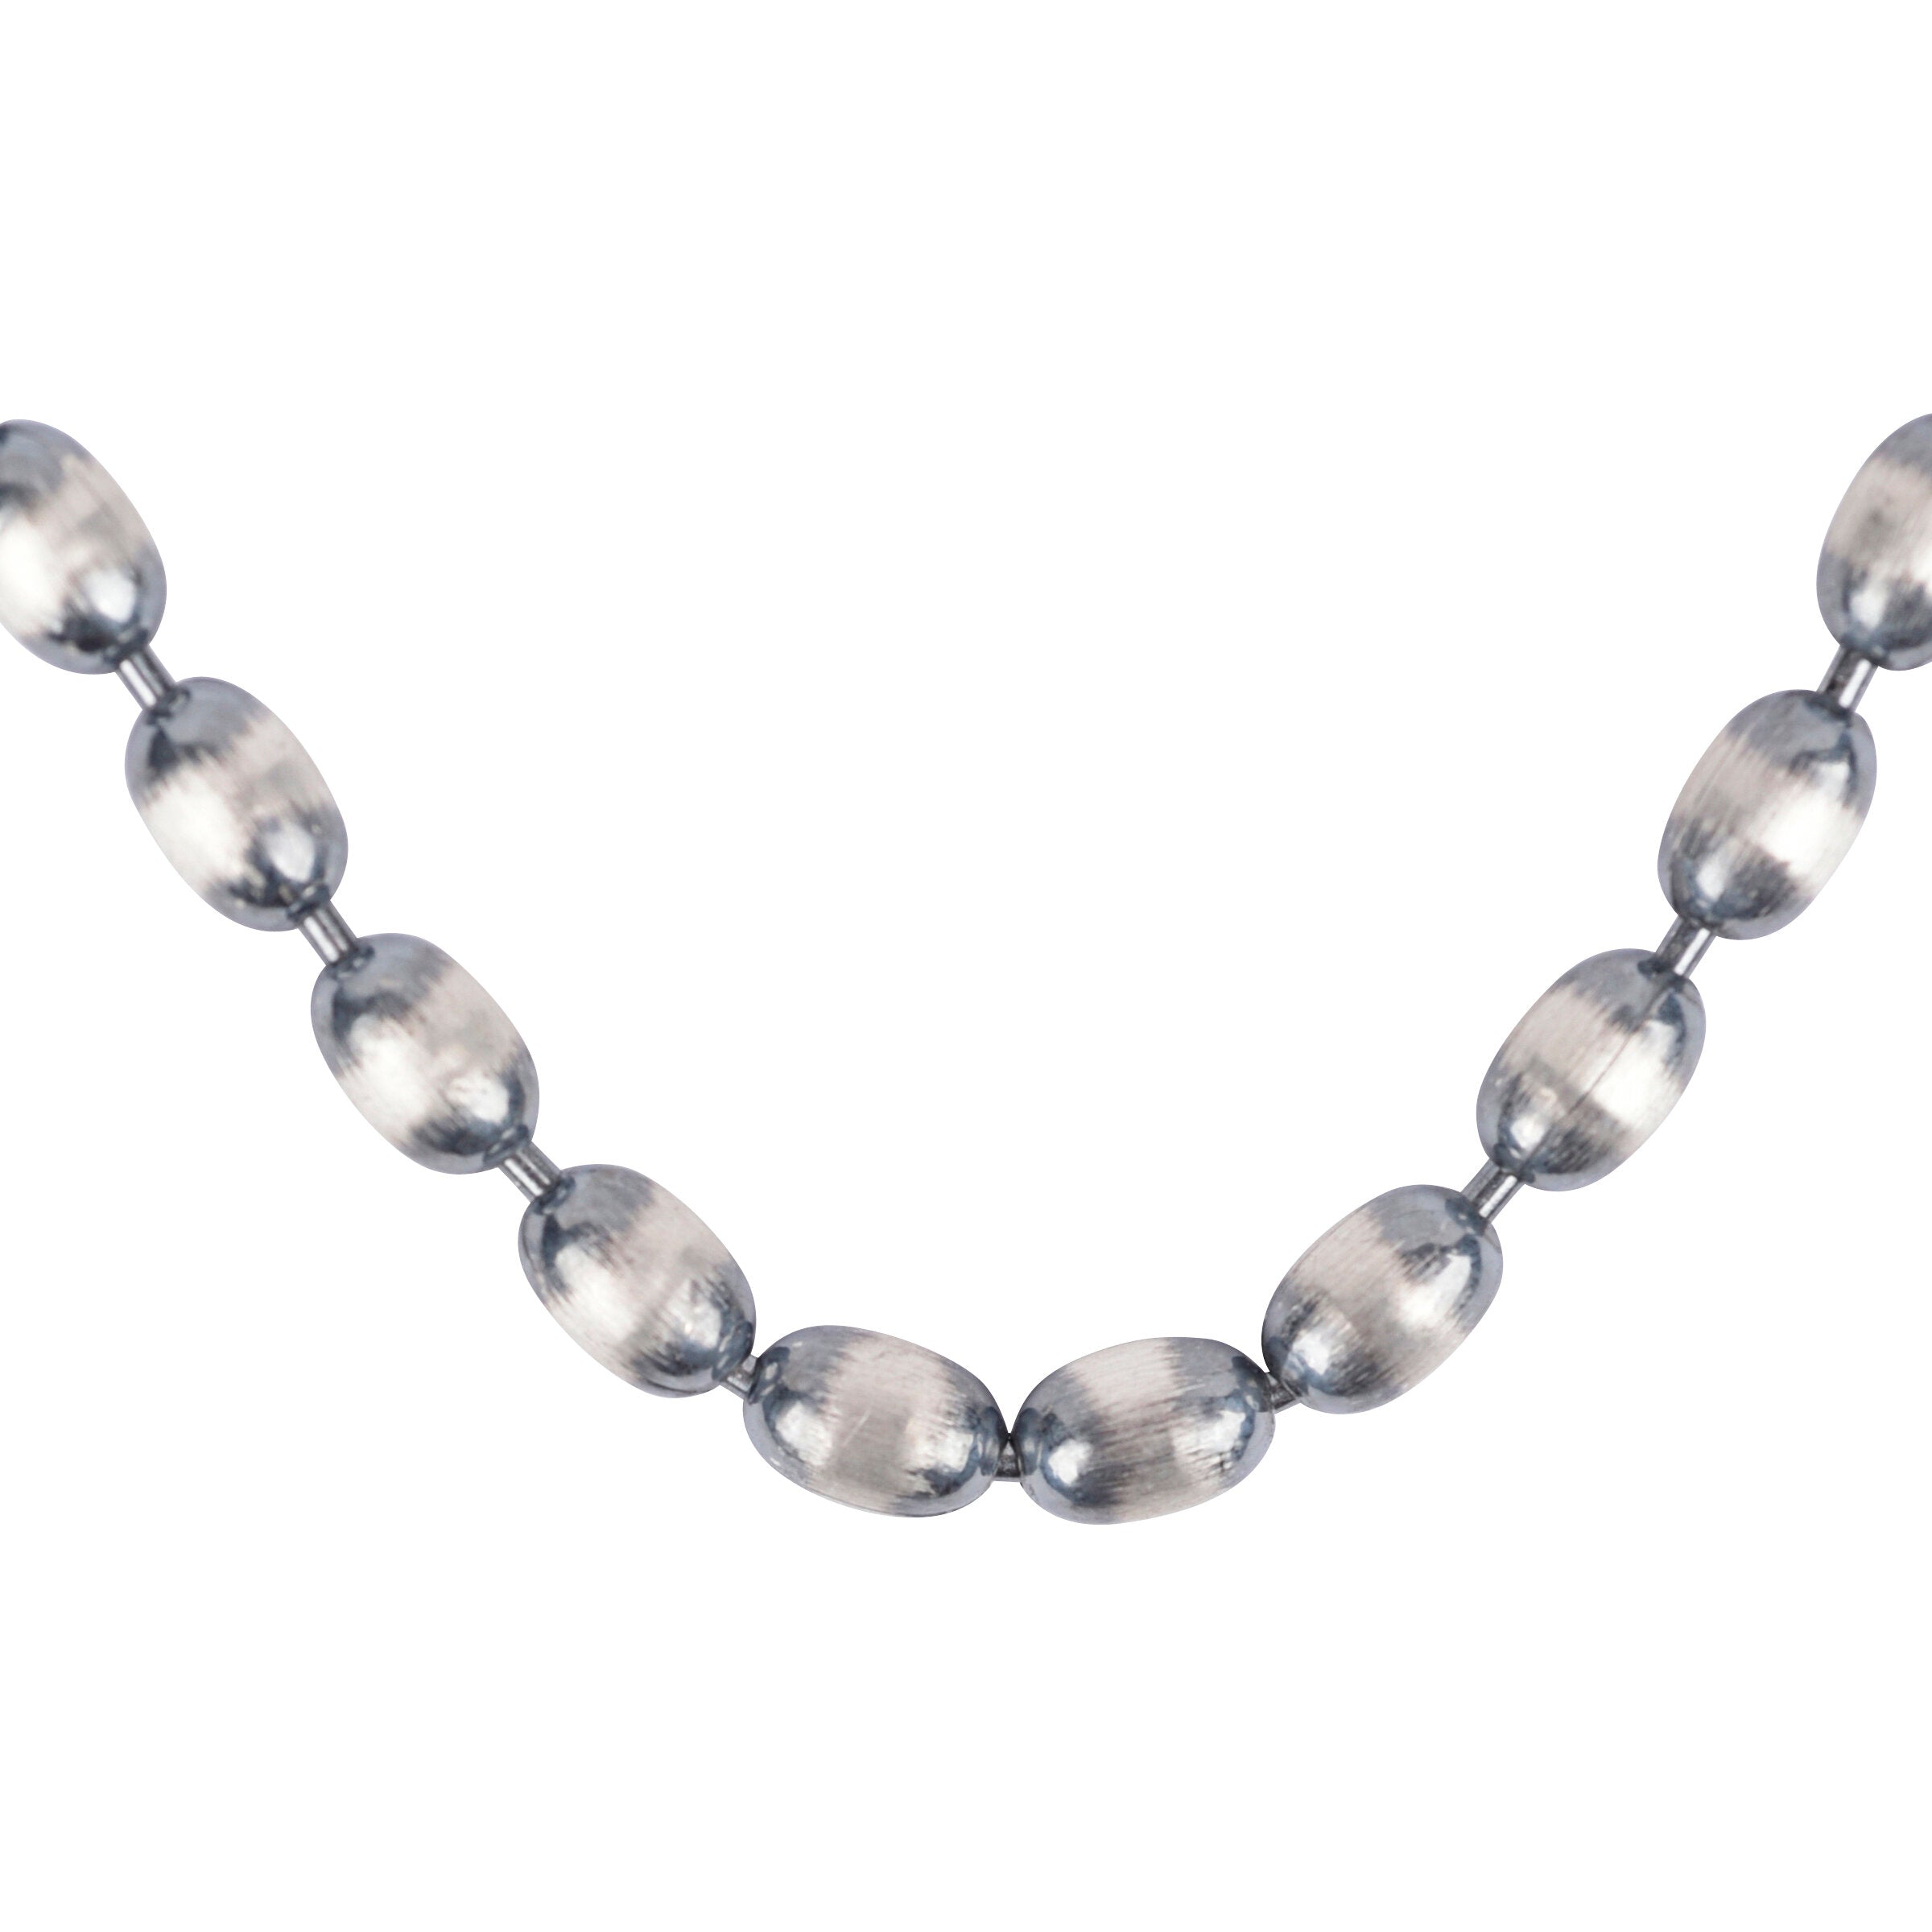 Desert Pearl 4 x 6 mm Oval Bead Necklaces